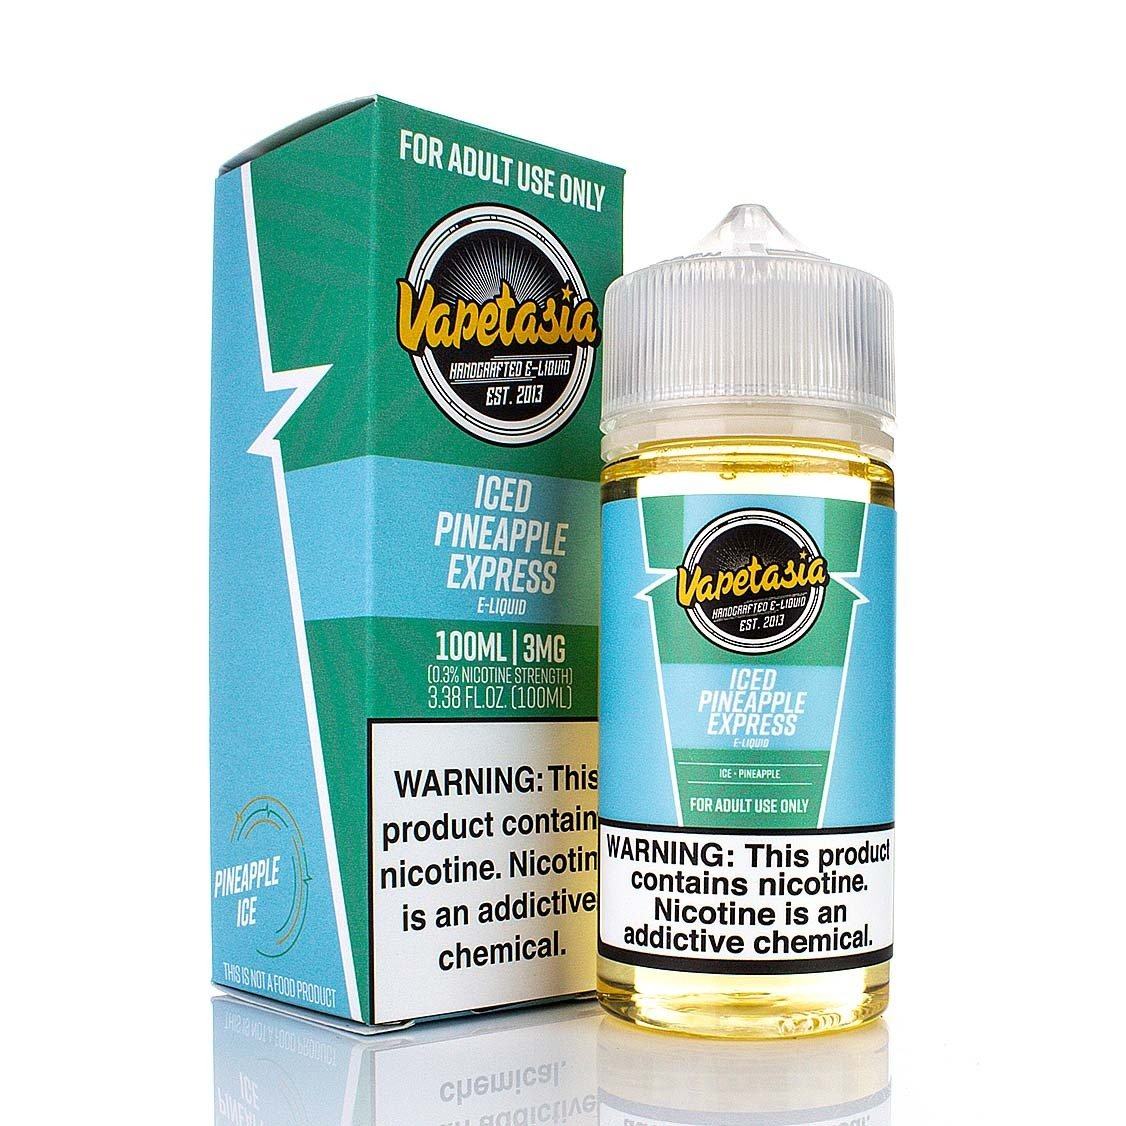 Iced Pineapple Express by Vapetasia 100ml with Packaging